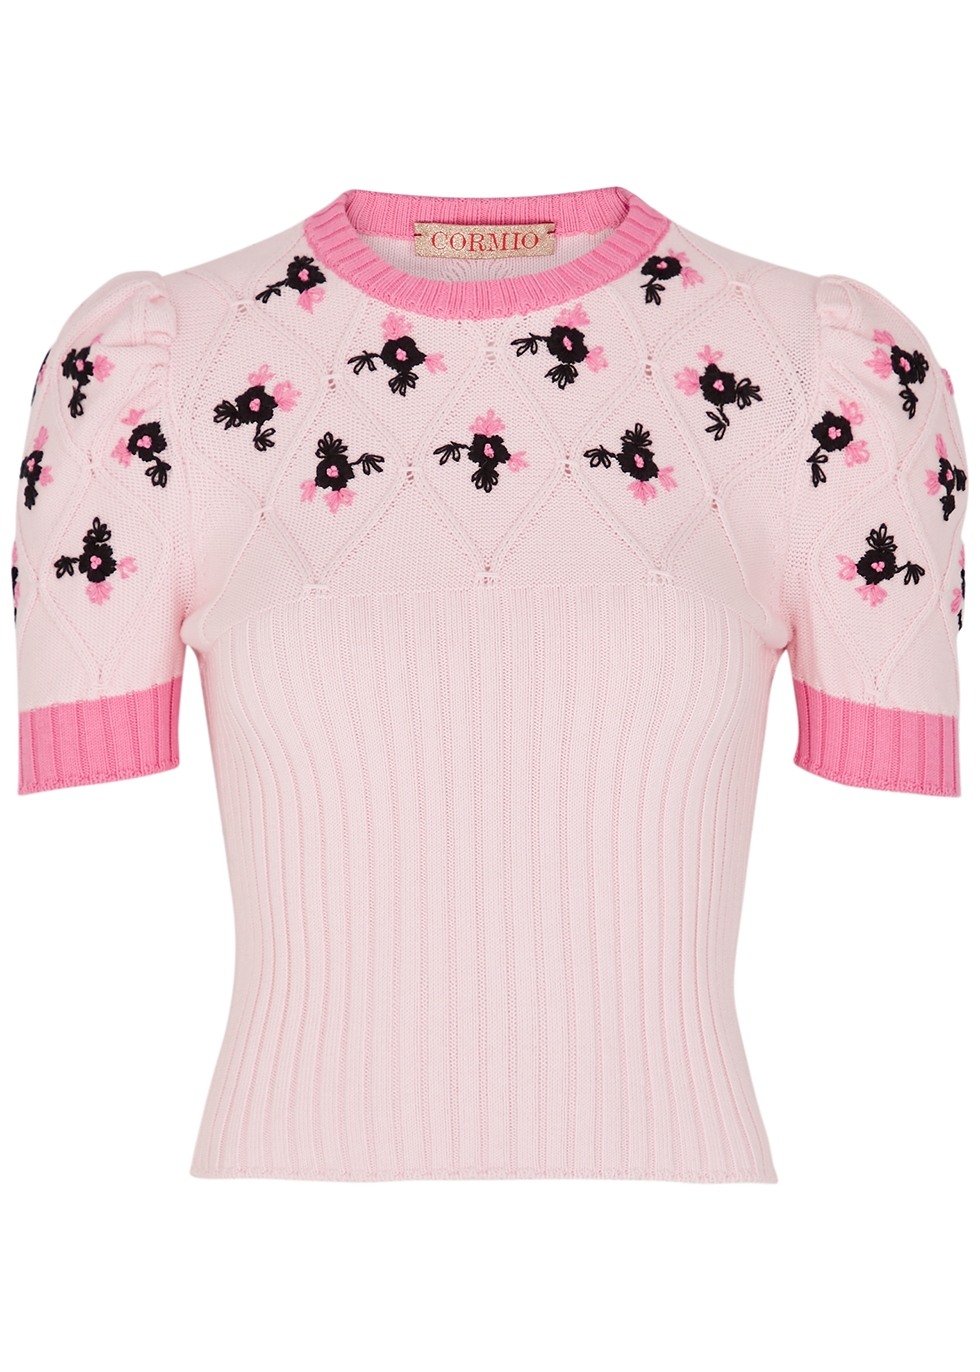 CORMIO OMA pink embroidered cotton-knit top - Harvey Nichols